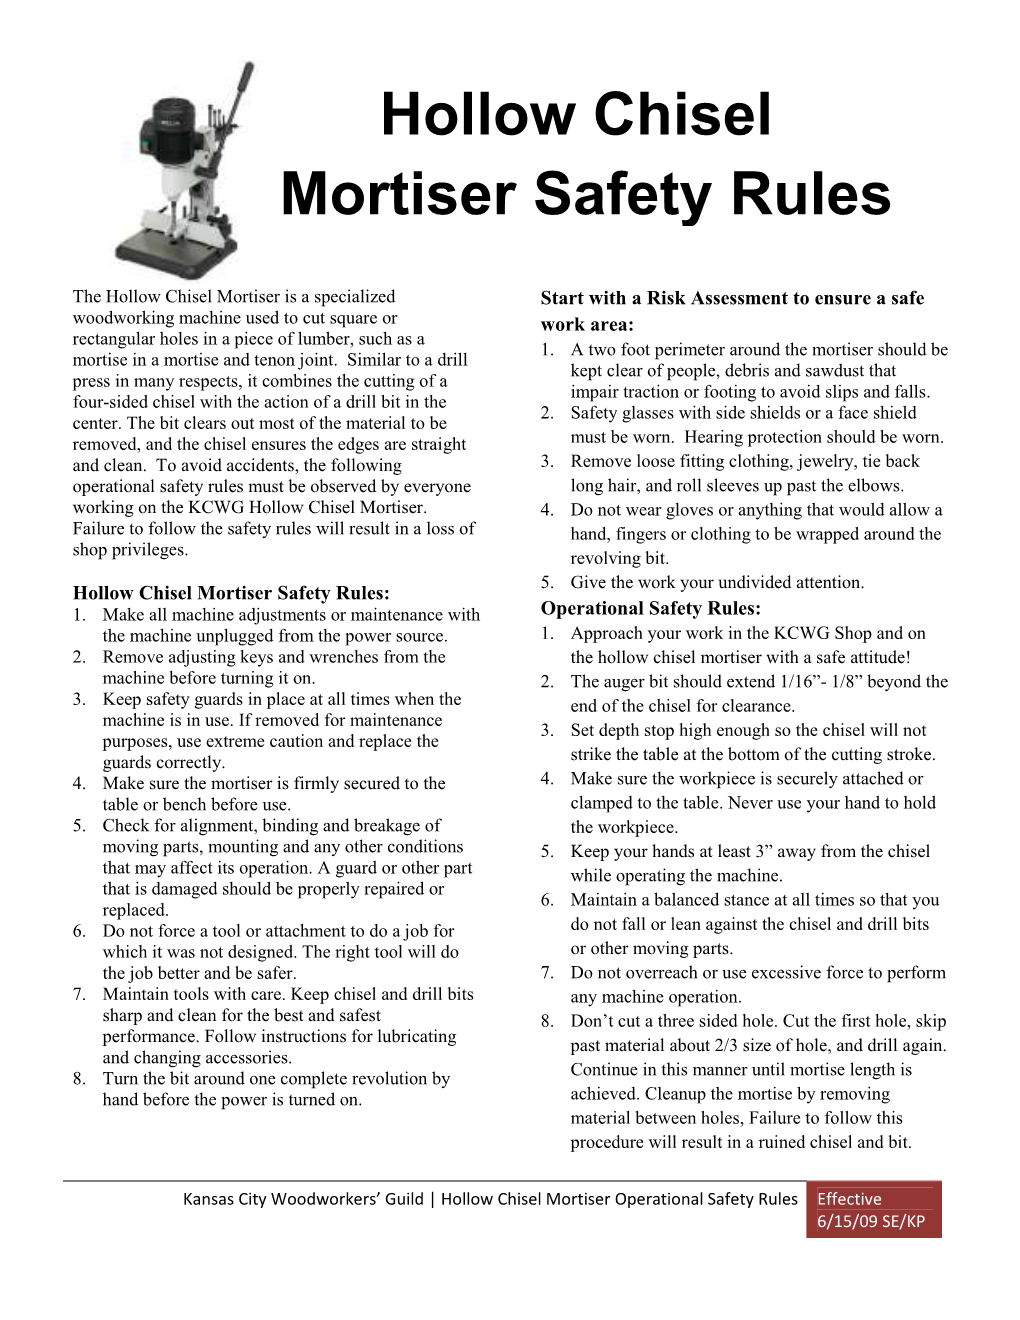 Hollow Chisel Mortiser Safety Rules: 1